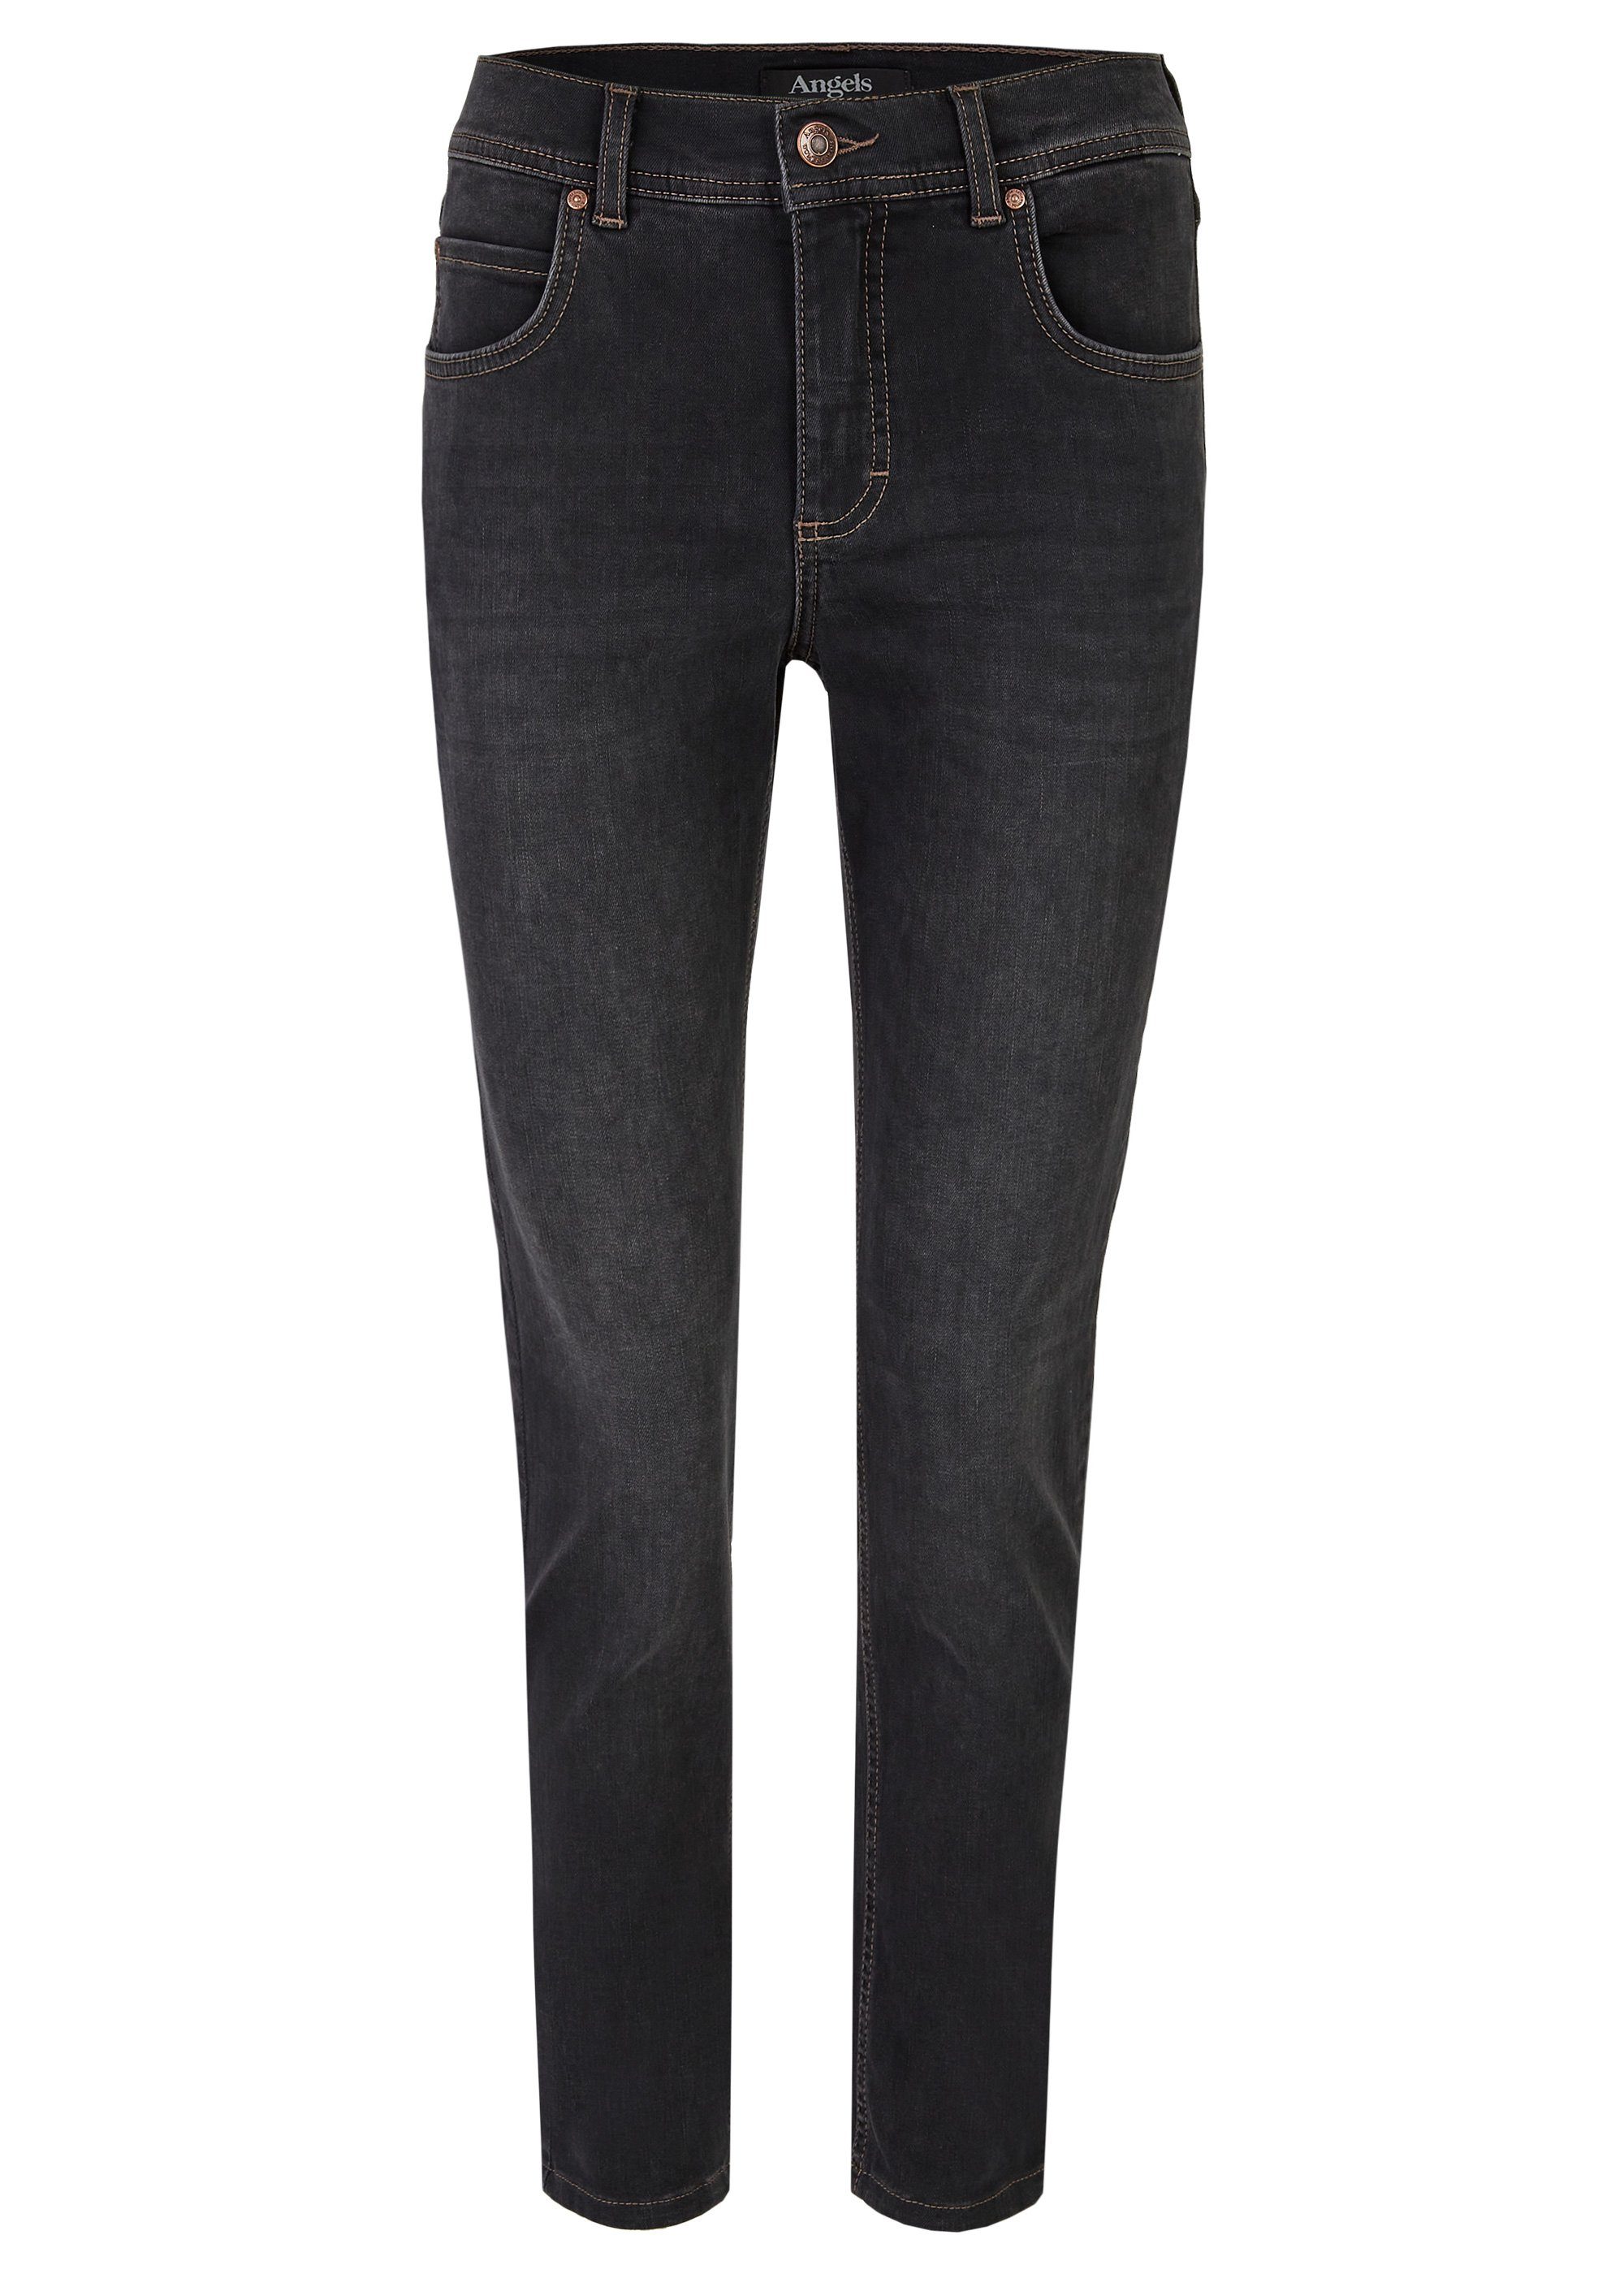 ANGELS Stretch-Jeans ANGELS JEANS ORNELLA anthracite used 346 680007.1158 - STRETCH 1158 anthracite used